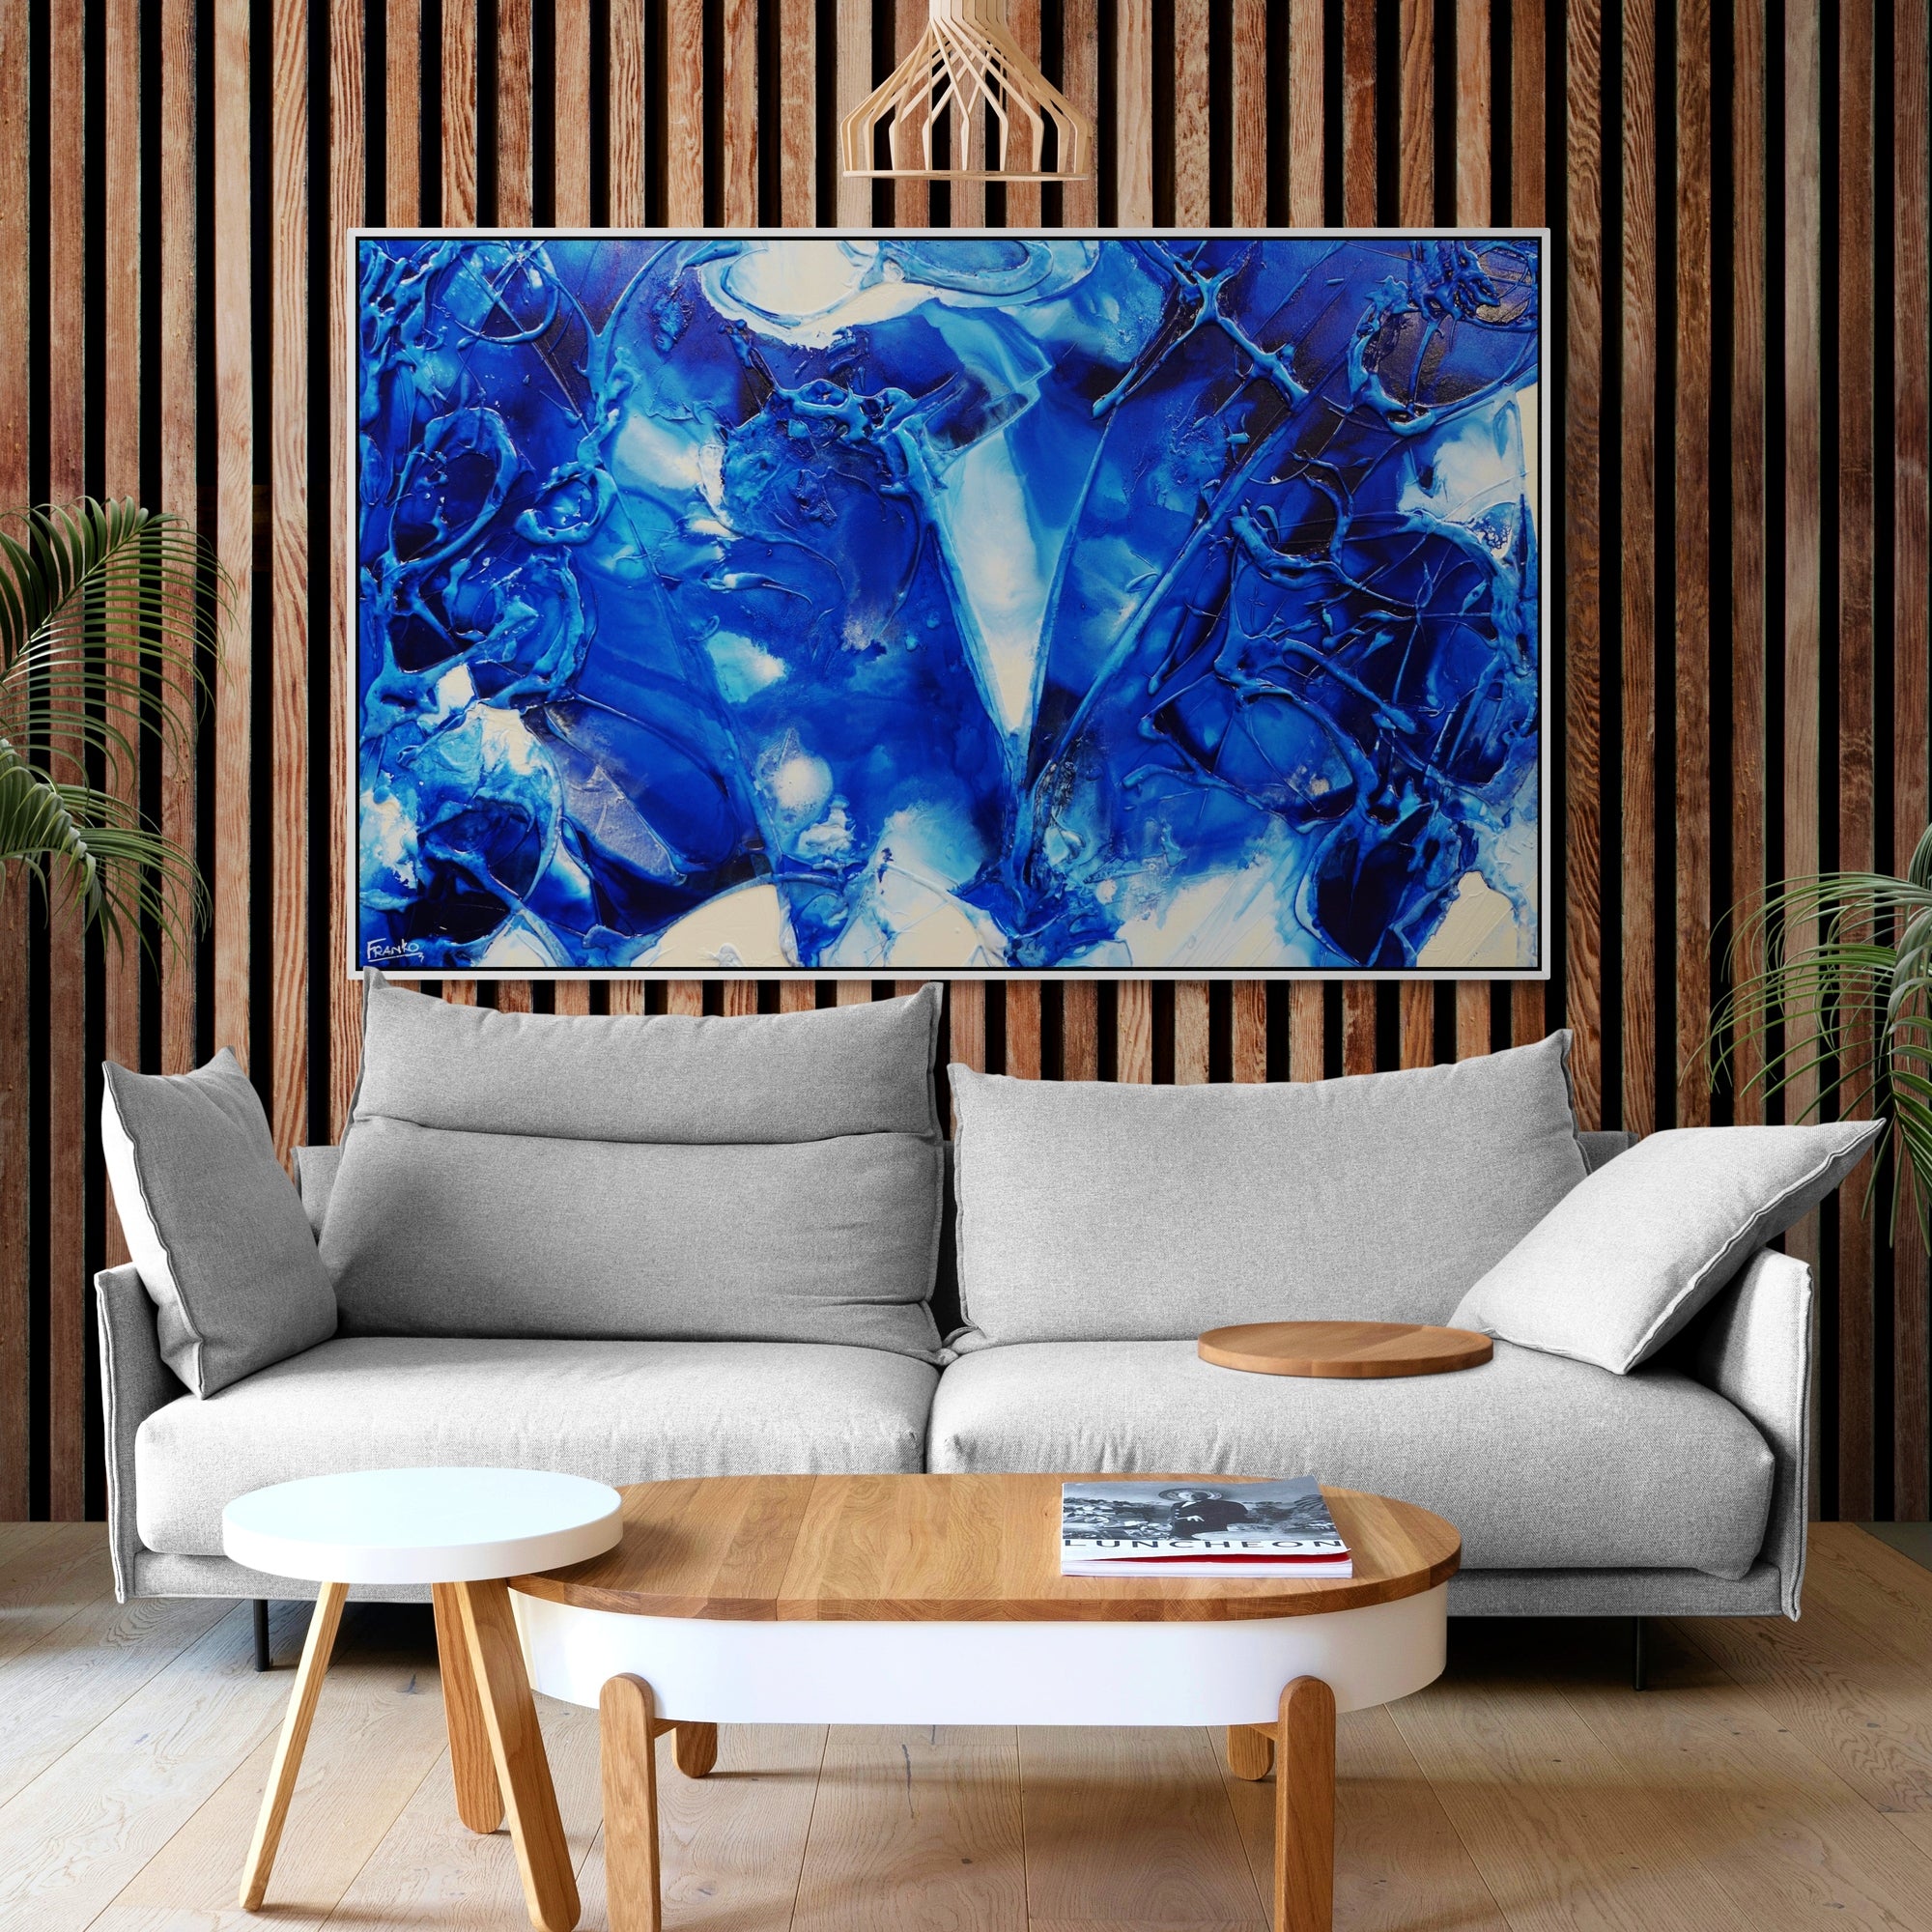 Aquatica 160cm x 100cm Blue White Textured Abstract Painting